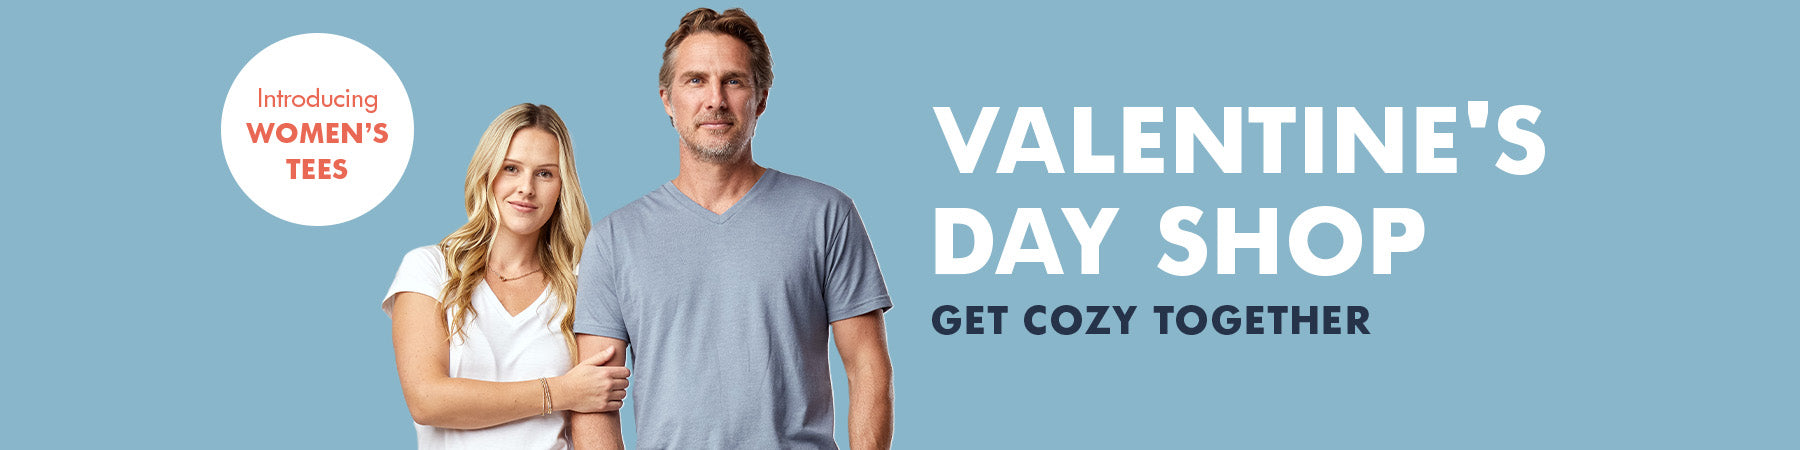 Shop for Your Favorite Person this Valentine's Day | Fresh Clean Threads Canada